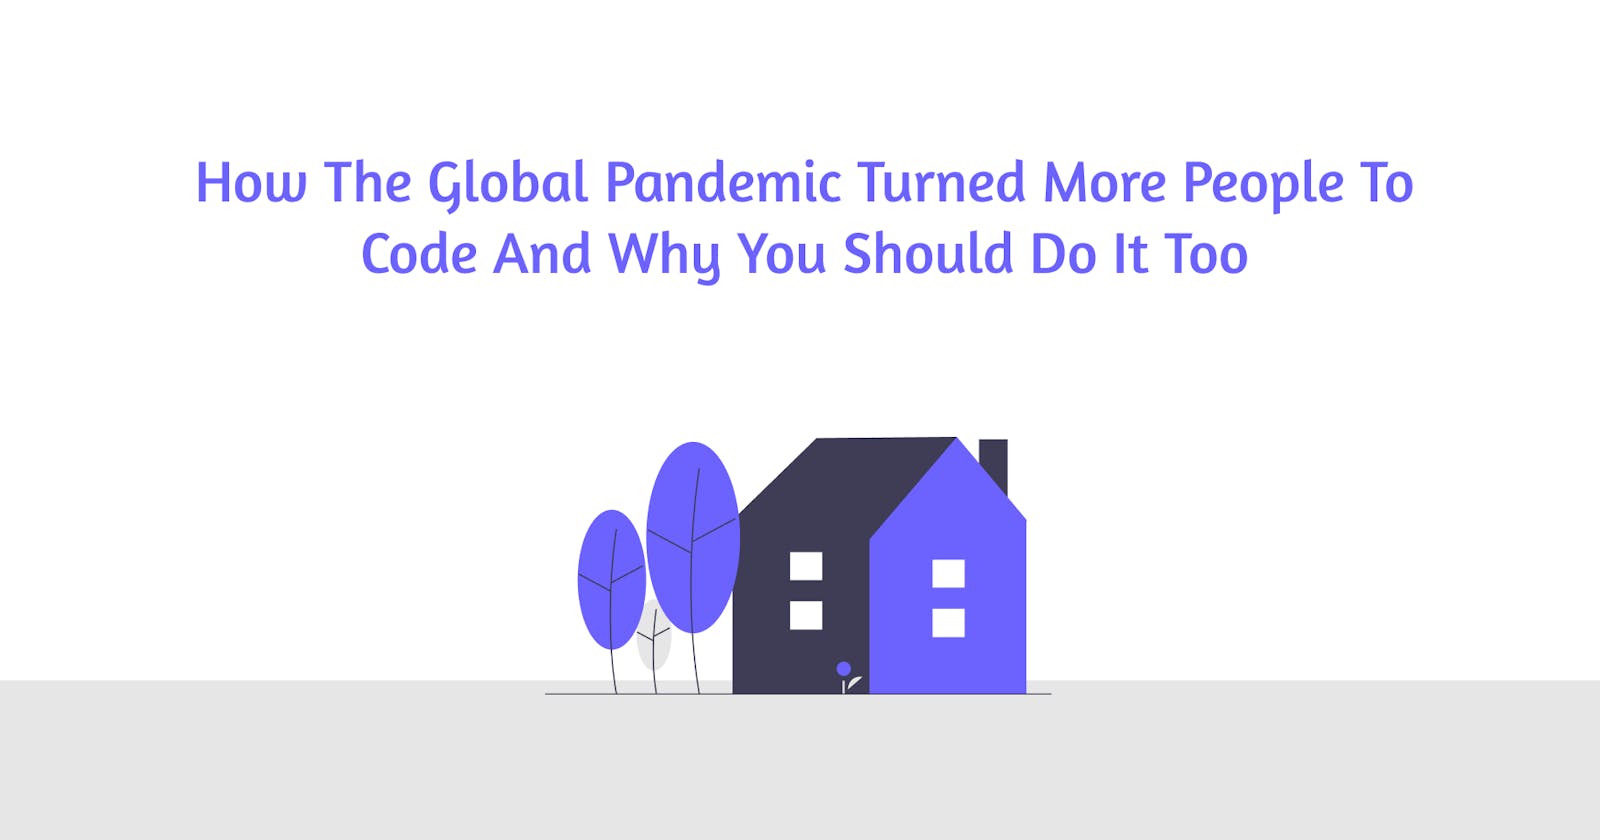 How the global pandemic turned more people to code and why you should do it too